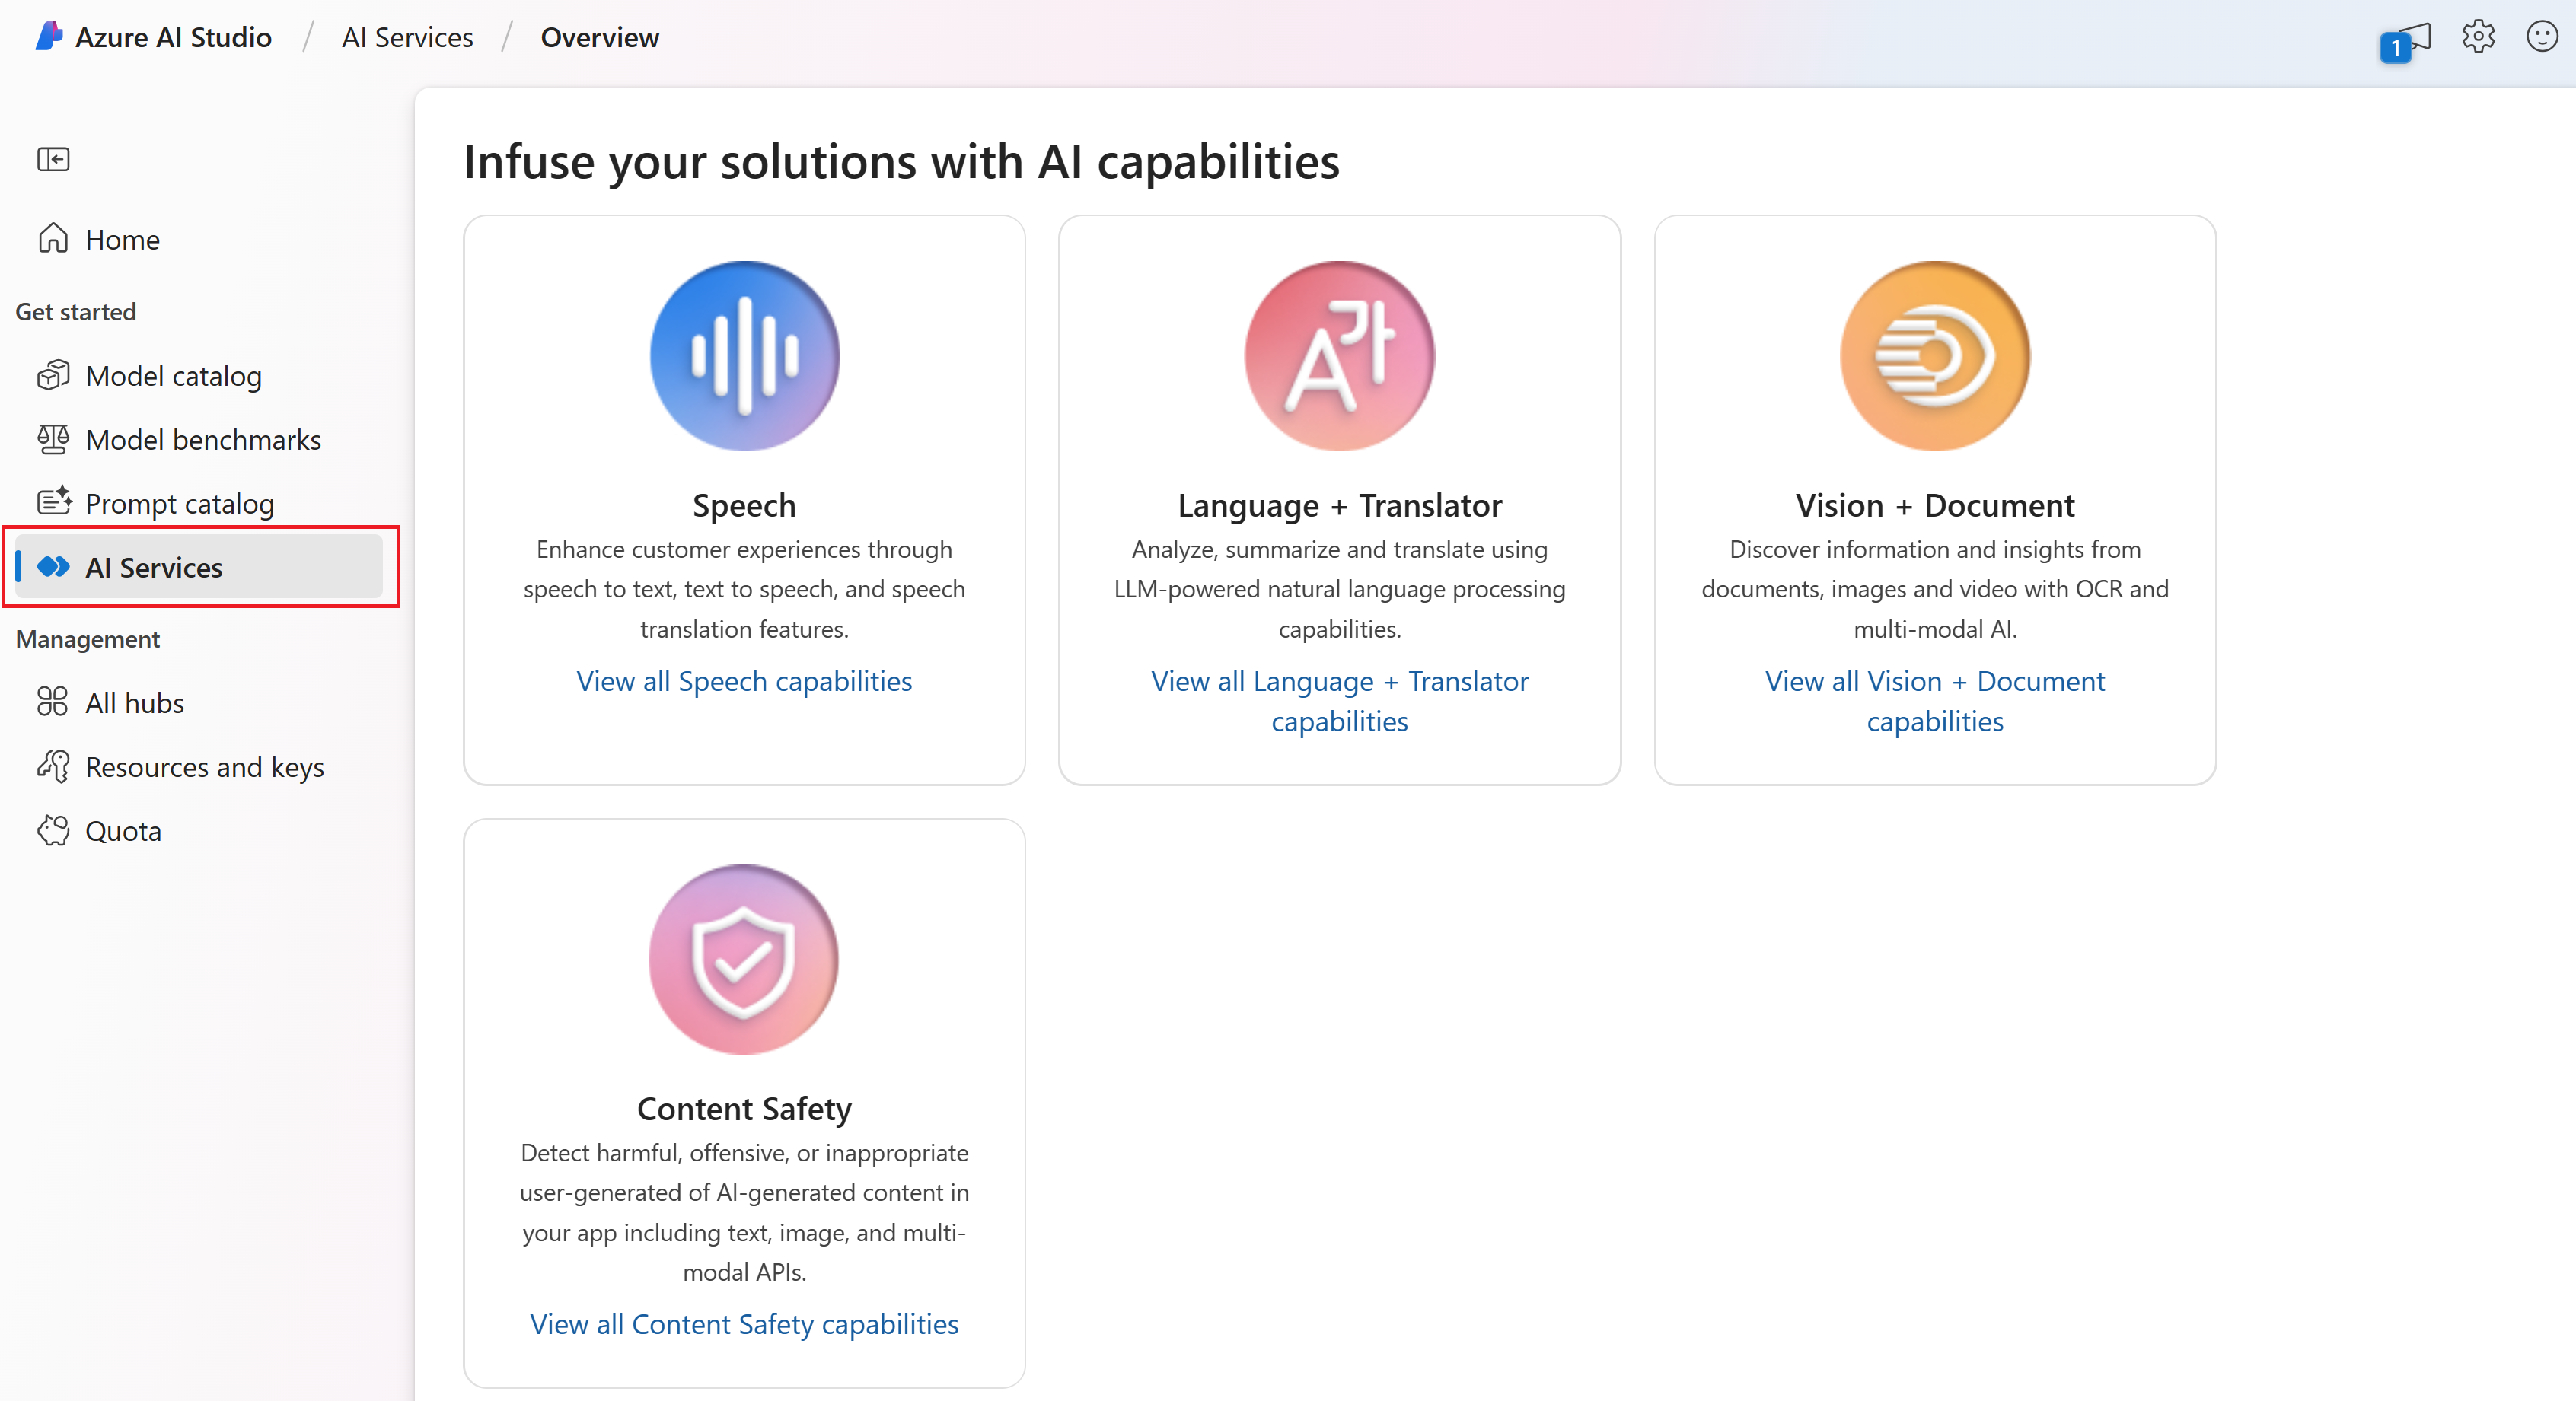 Screenshot of the AI Services page in Azure AI Studio.